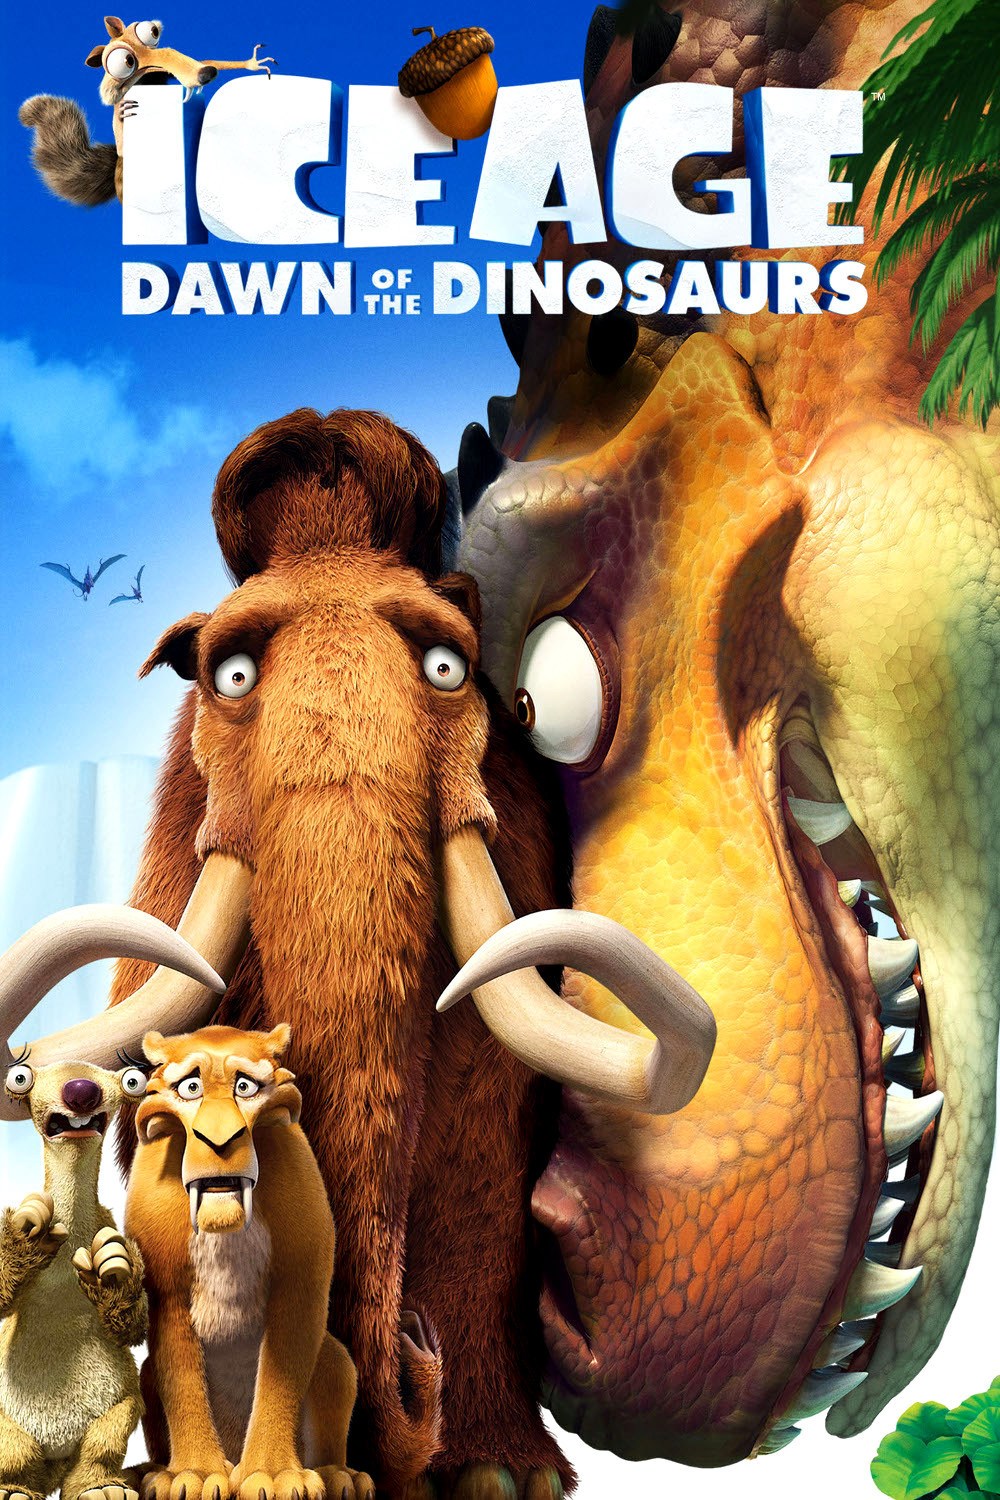 Ice age 3 dawn of the dinosaurs full movie youtube